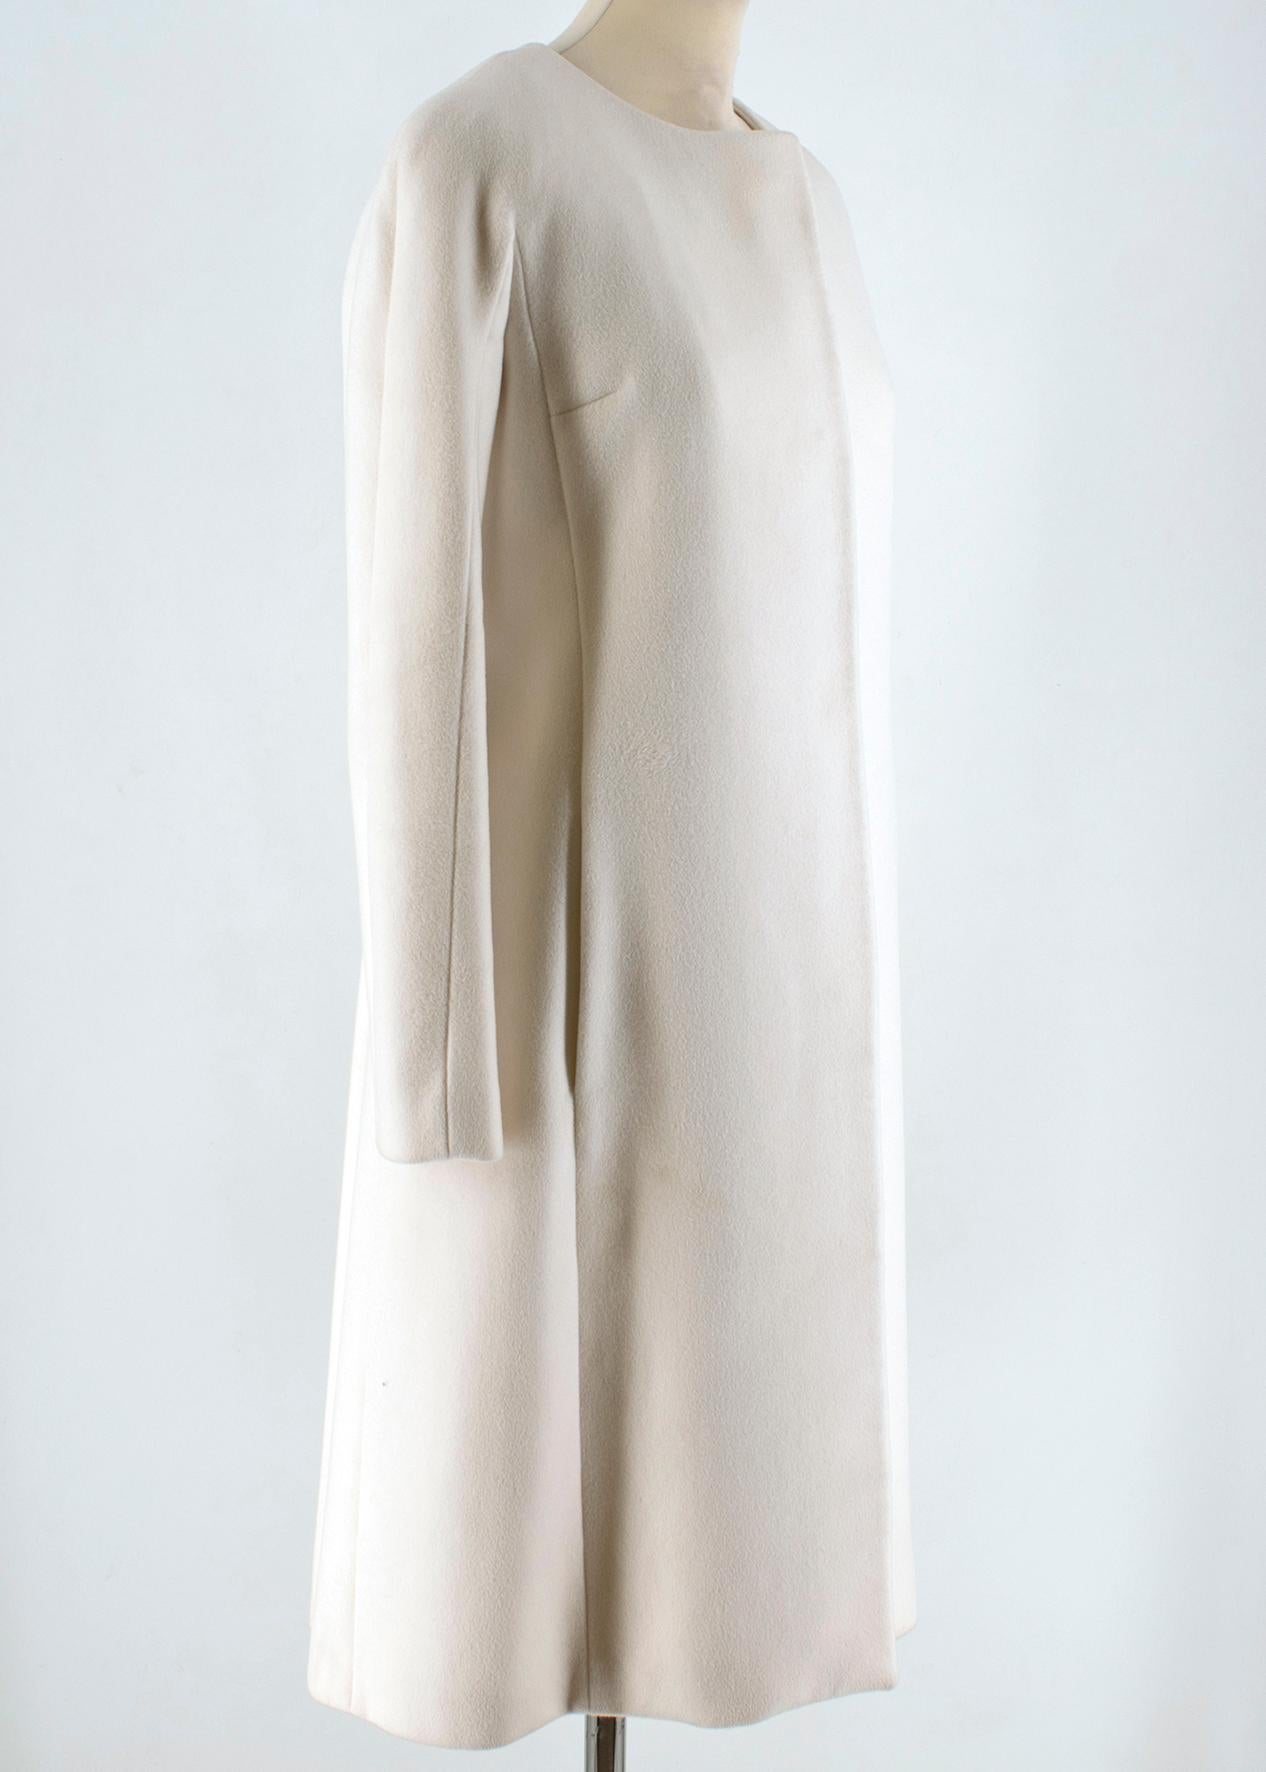 Jasper Conran cream beige cashmere long coat 

lining 100% silk;
no collar;
hidden button closure;
pleated at the back;

Please note, these items are pre-owned and may show signs of
being stored even when unworn and unused. This is reflected within